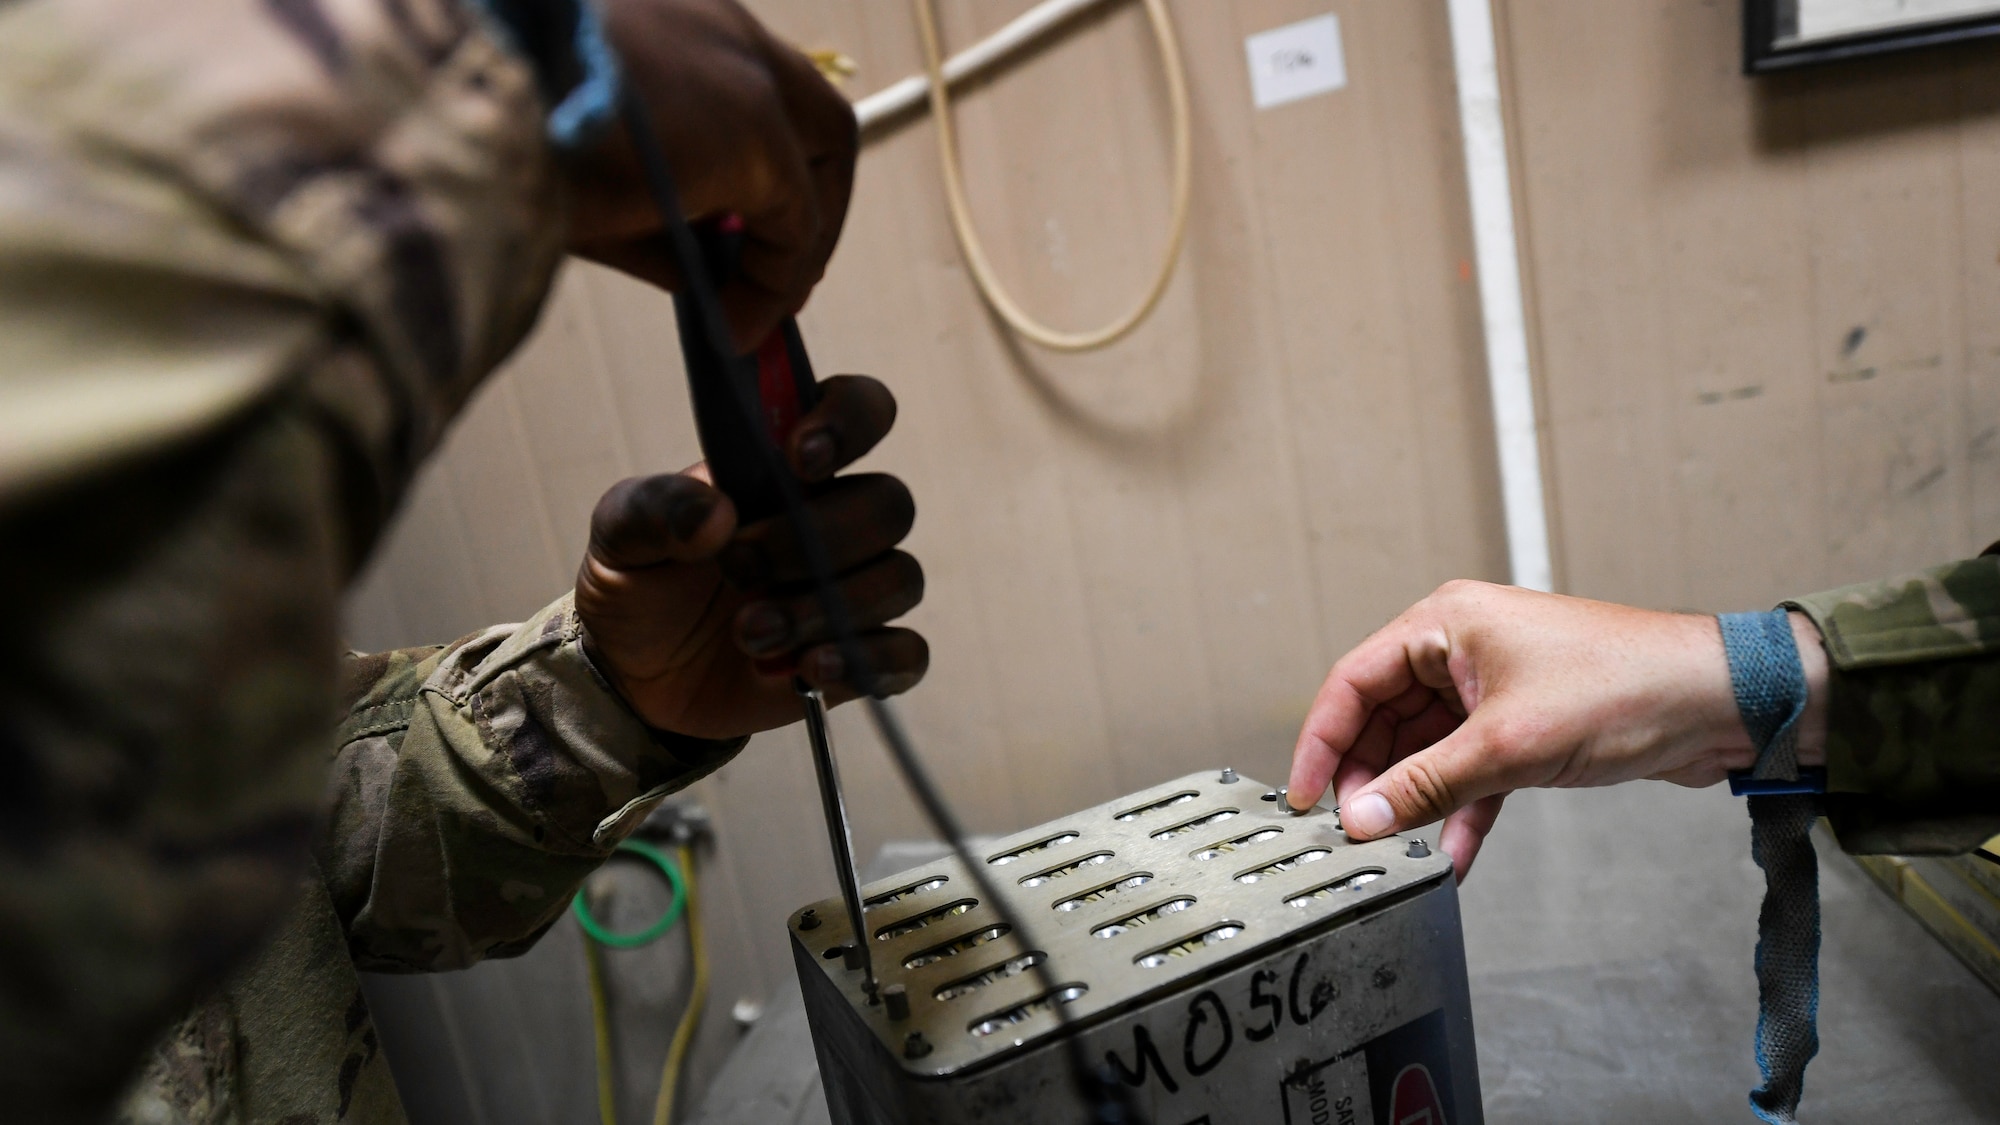 U.S. Air Force Airman 1st Class Conner Quintana and Senior Airman Samson Lawanson, 386th Expeditionary Maintenance Squadron munitions technician journeymen, install a security plate onto a flare housing module at Ali Al Salem Air Base, Kuwait, July 18, 2019. Security plates are used for keeping flare and chaff units in place and to assist in identifying what countermeasure package is currently installed. (U.S. Air Force photo by Staff. Sgt. Mozer O. Da Cunha)